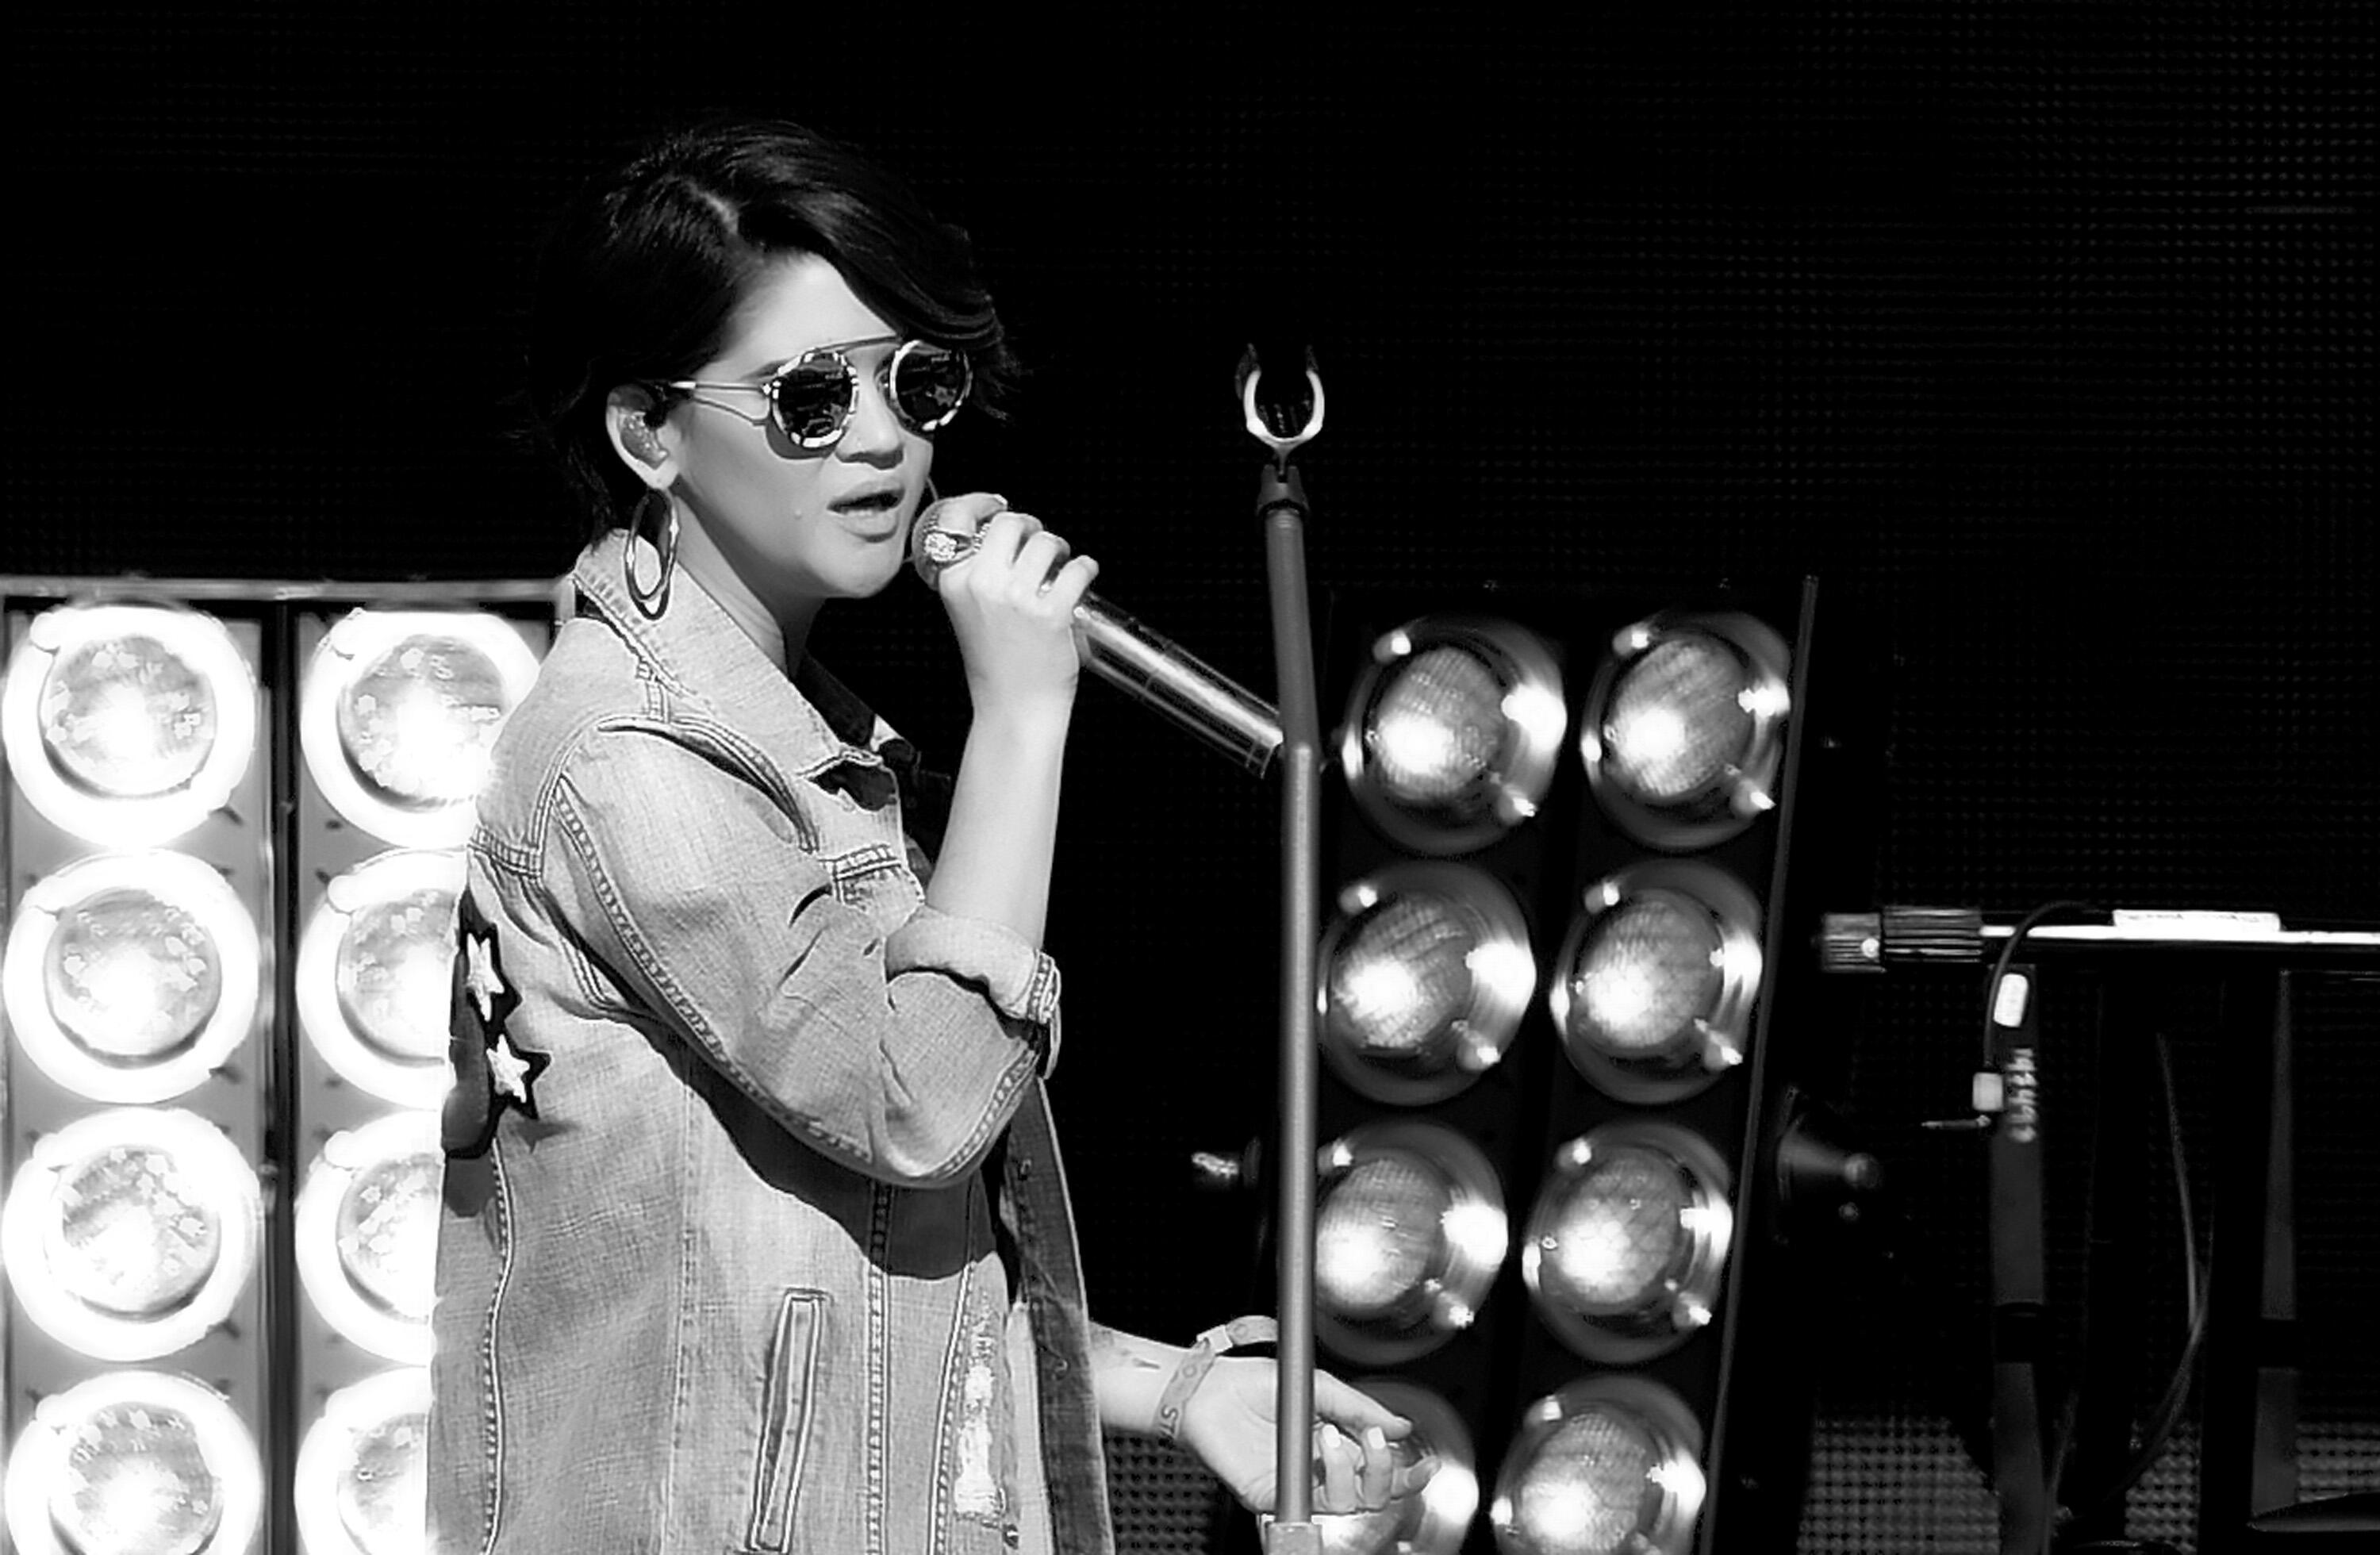 INDIO, CA - APRIL 29:  (EDITORS NOTE: This image has been converted to black and white.)  Singer Maren Morris performs on the Toyota Mane Stage during day 2 of 2017 Stagecoach California's Country Music Festival at the Empire Polo Club on April 29, 2017 i